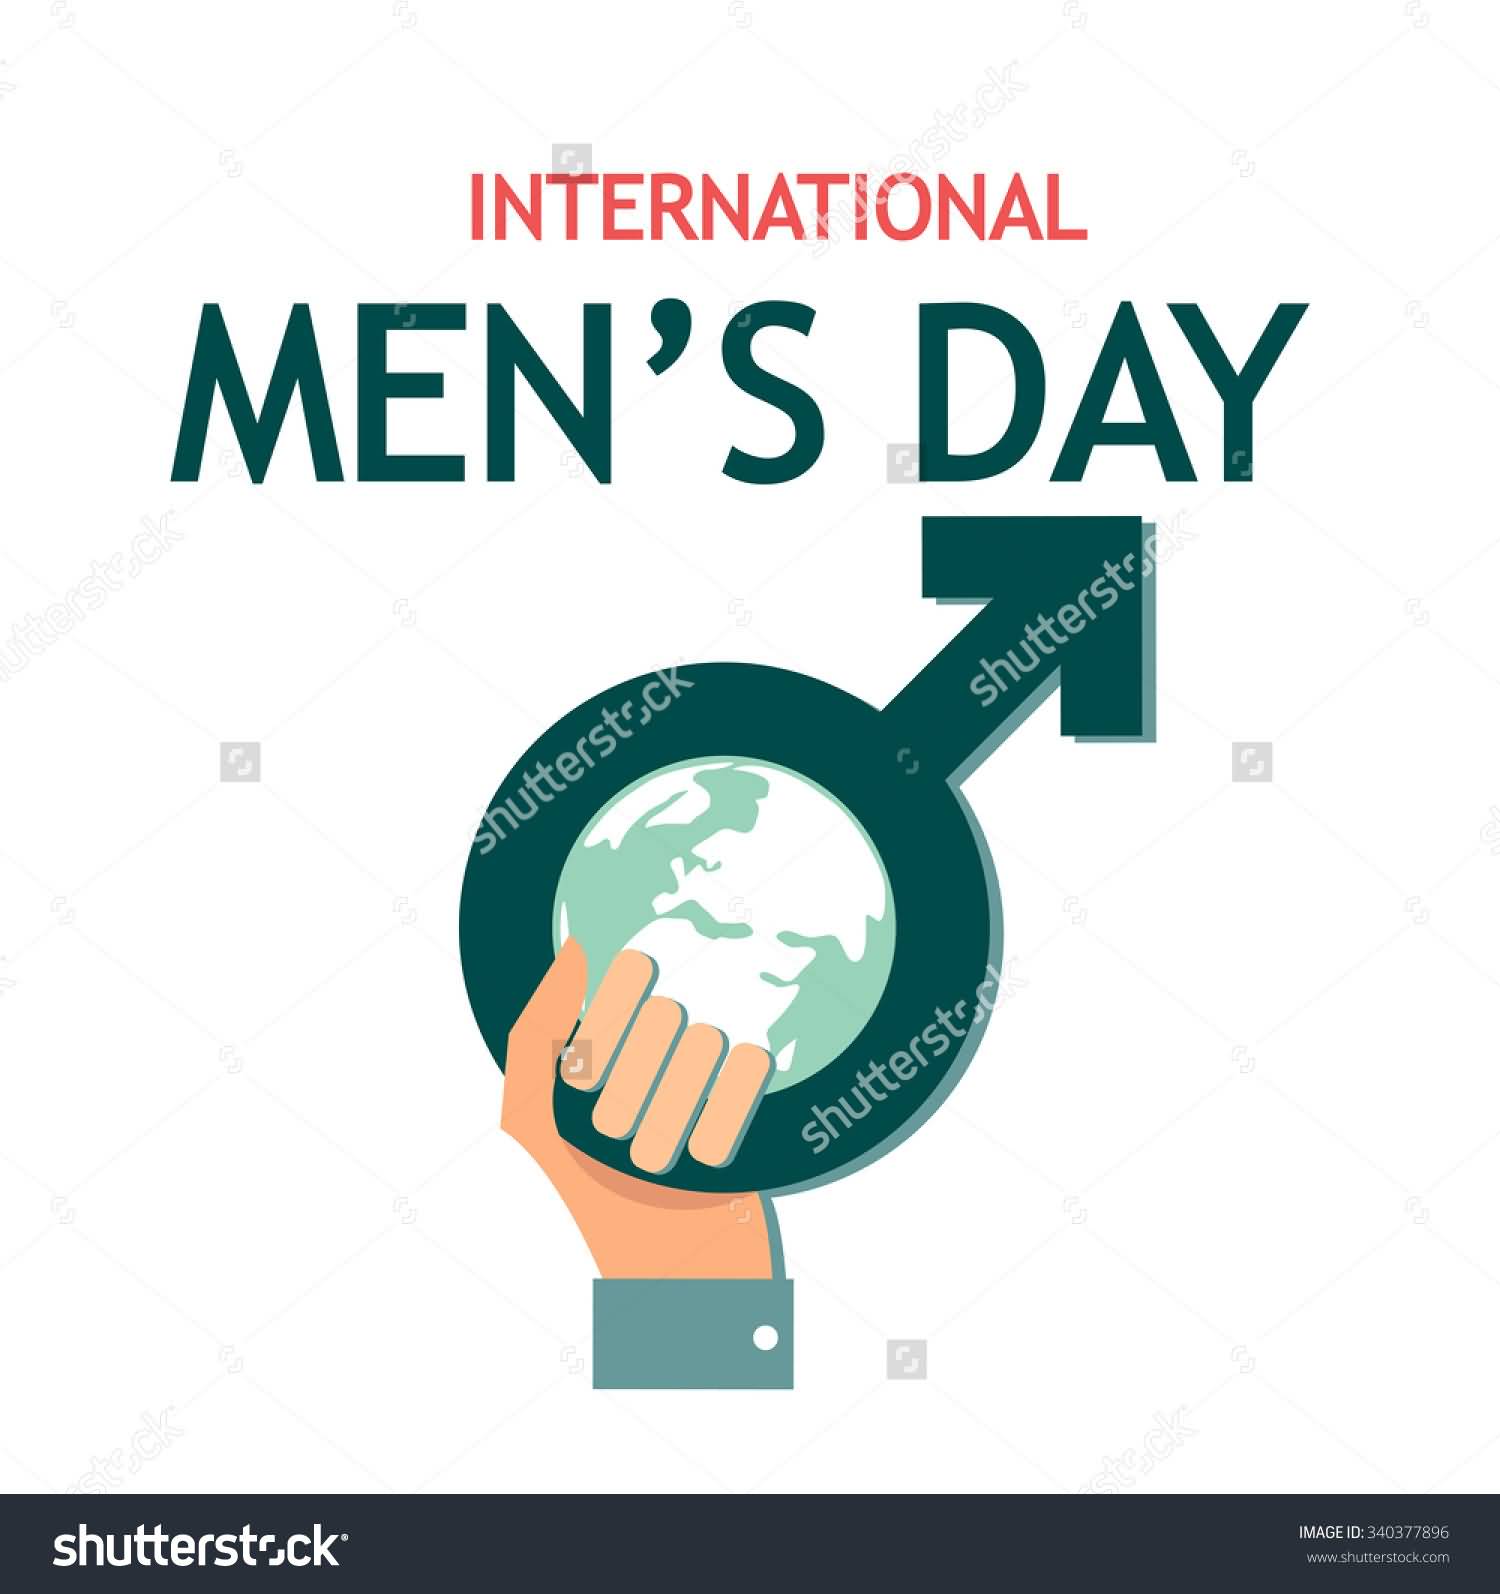 International Men's Day Symbol In Hand Picture